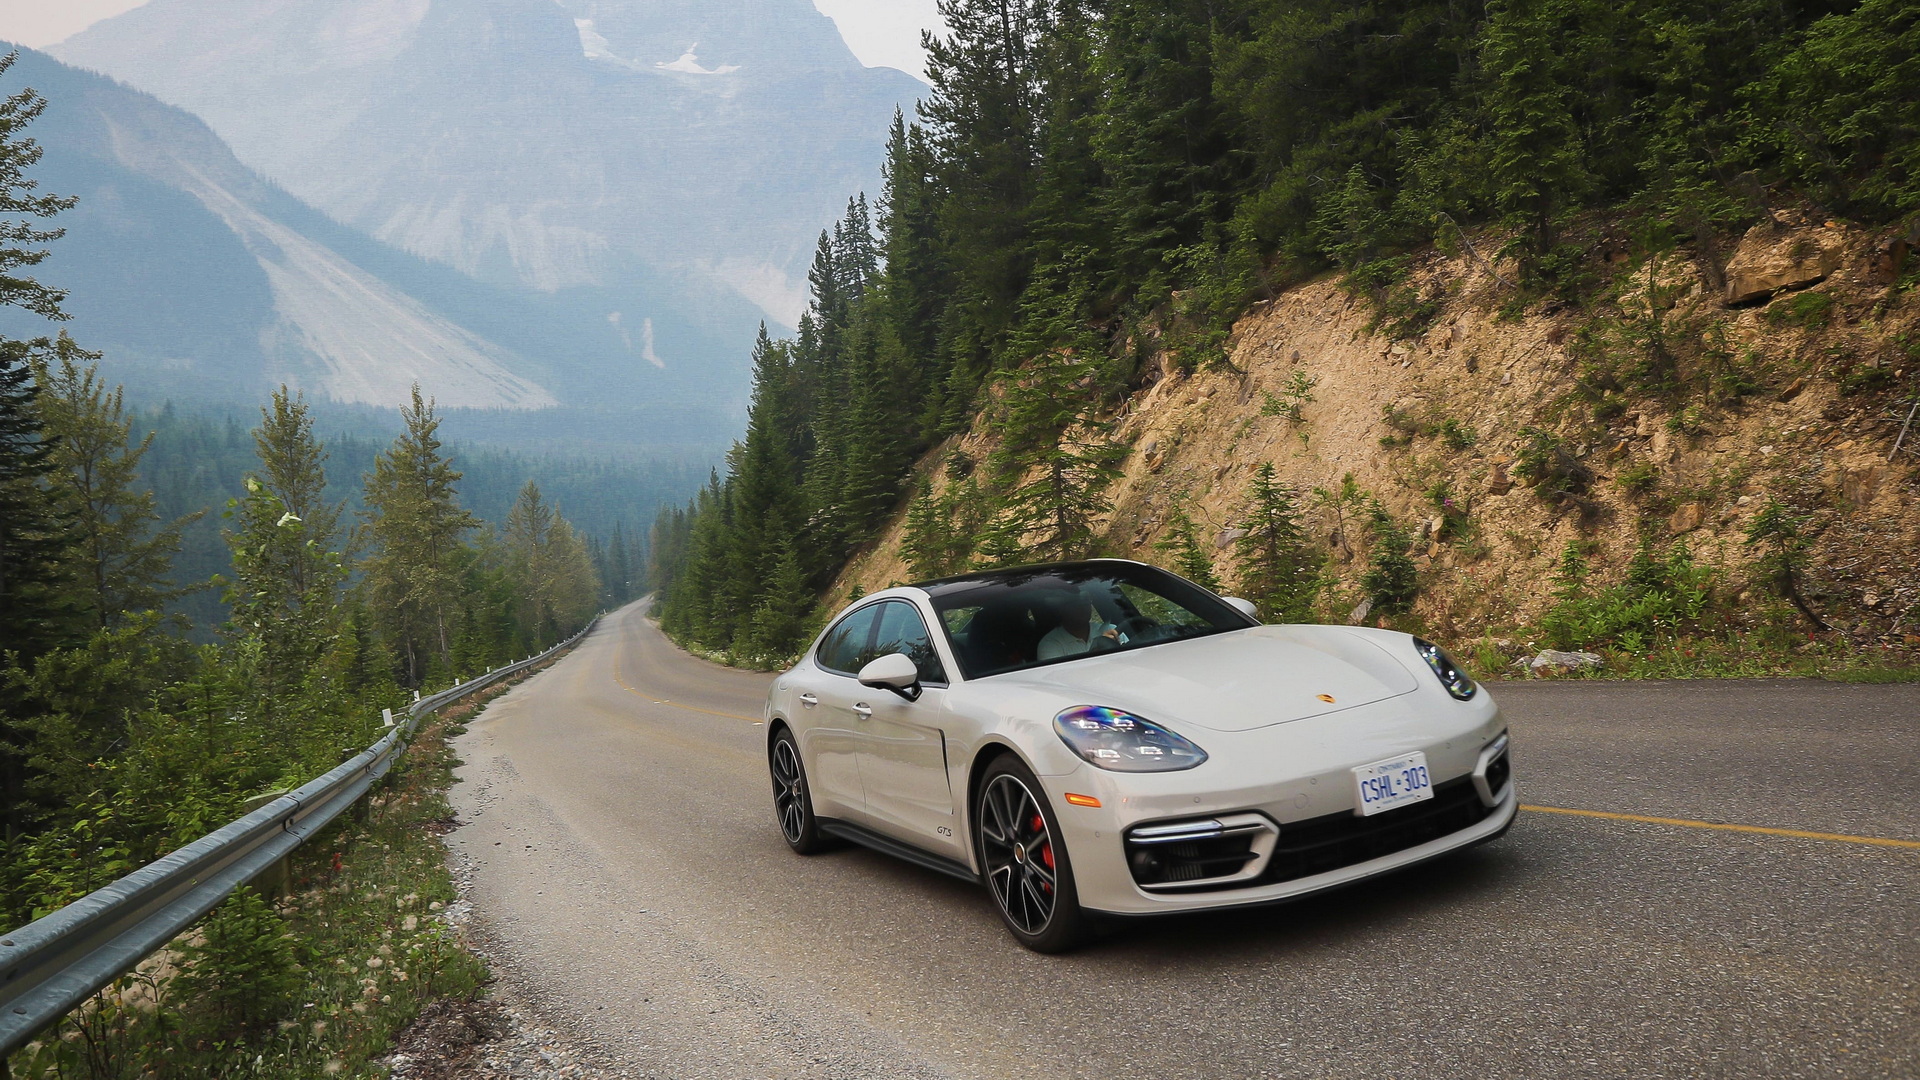 Porsche blunder puts $148,000 sports car on sale for just $18,000